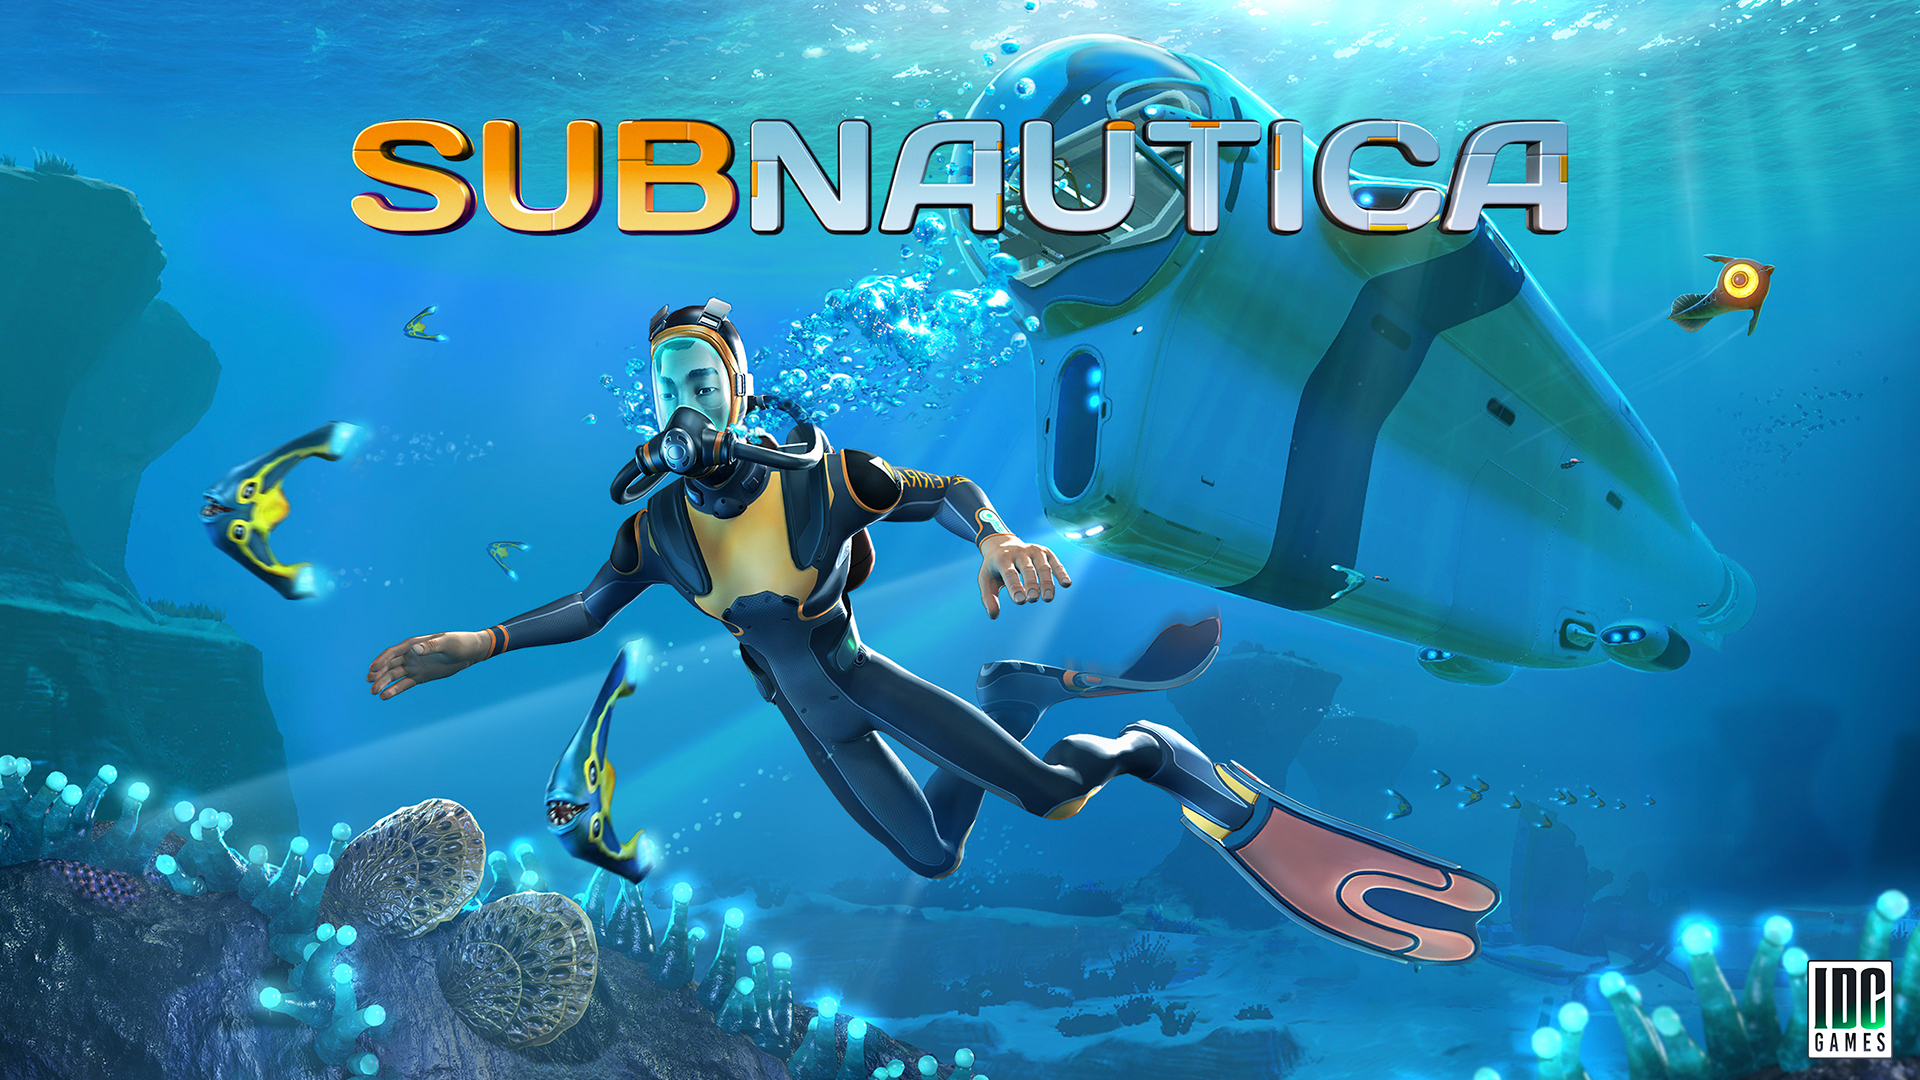 Exploring the depths: Technical analysis of the game Subnautica